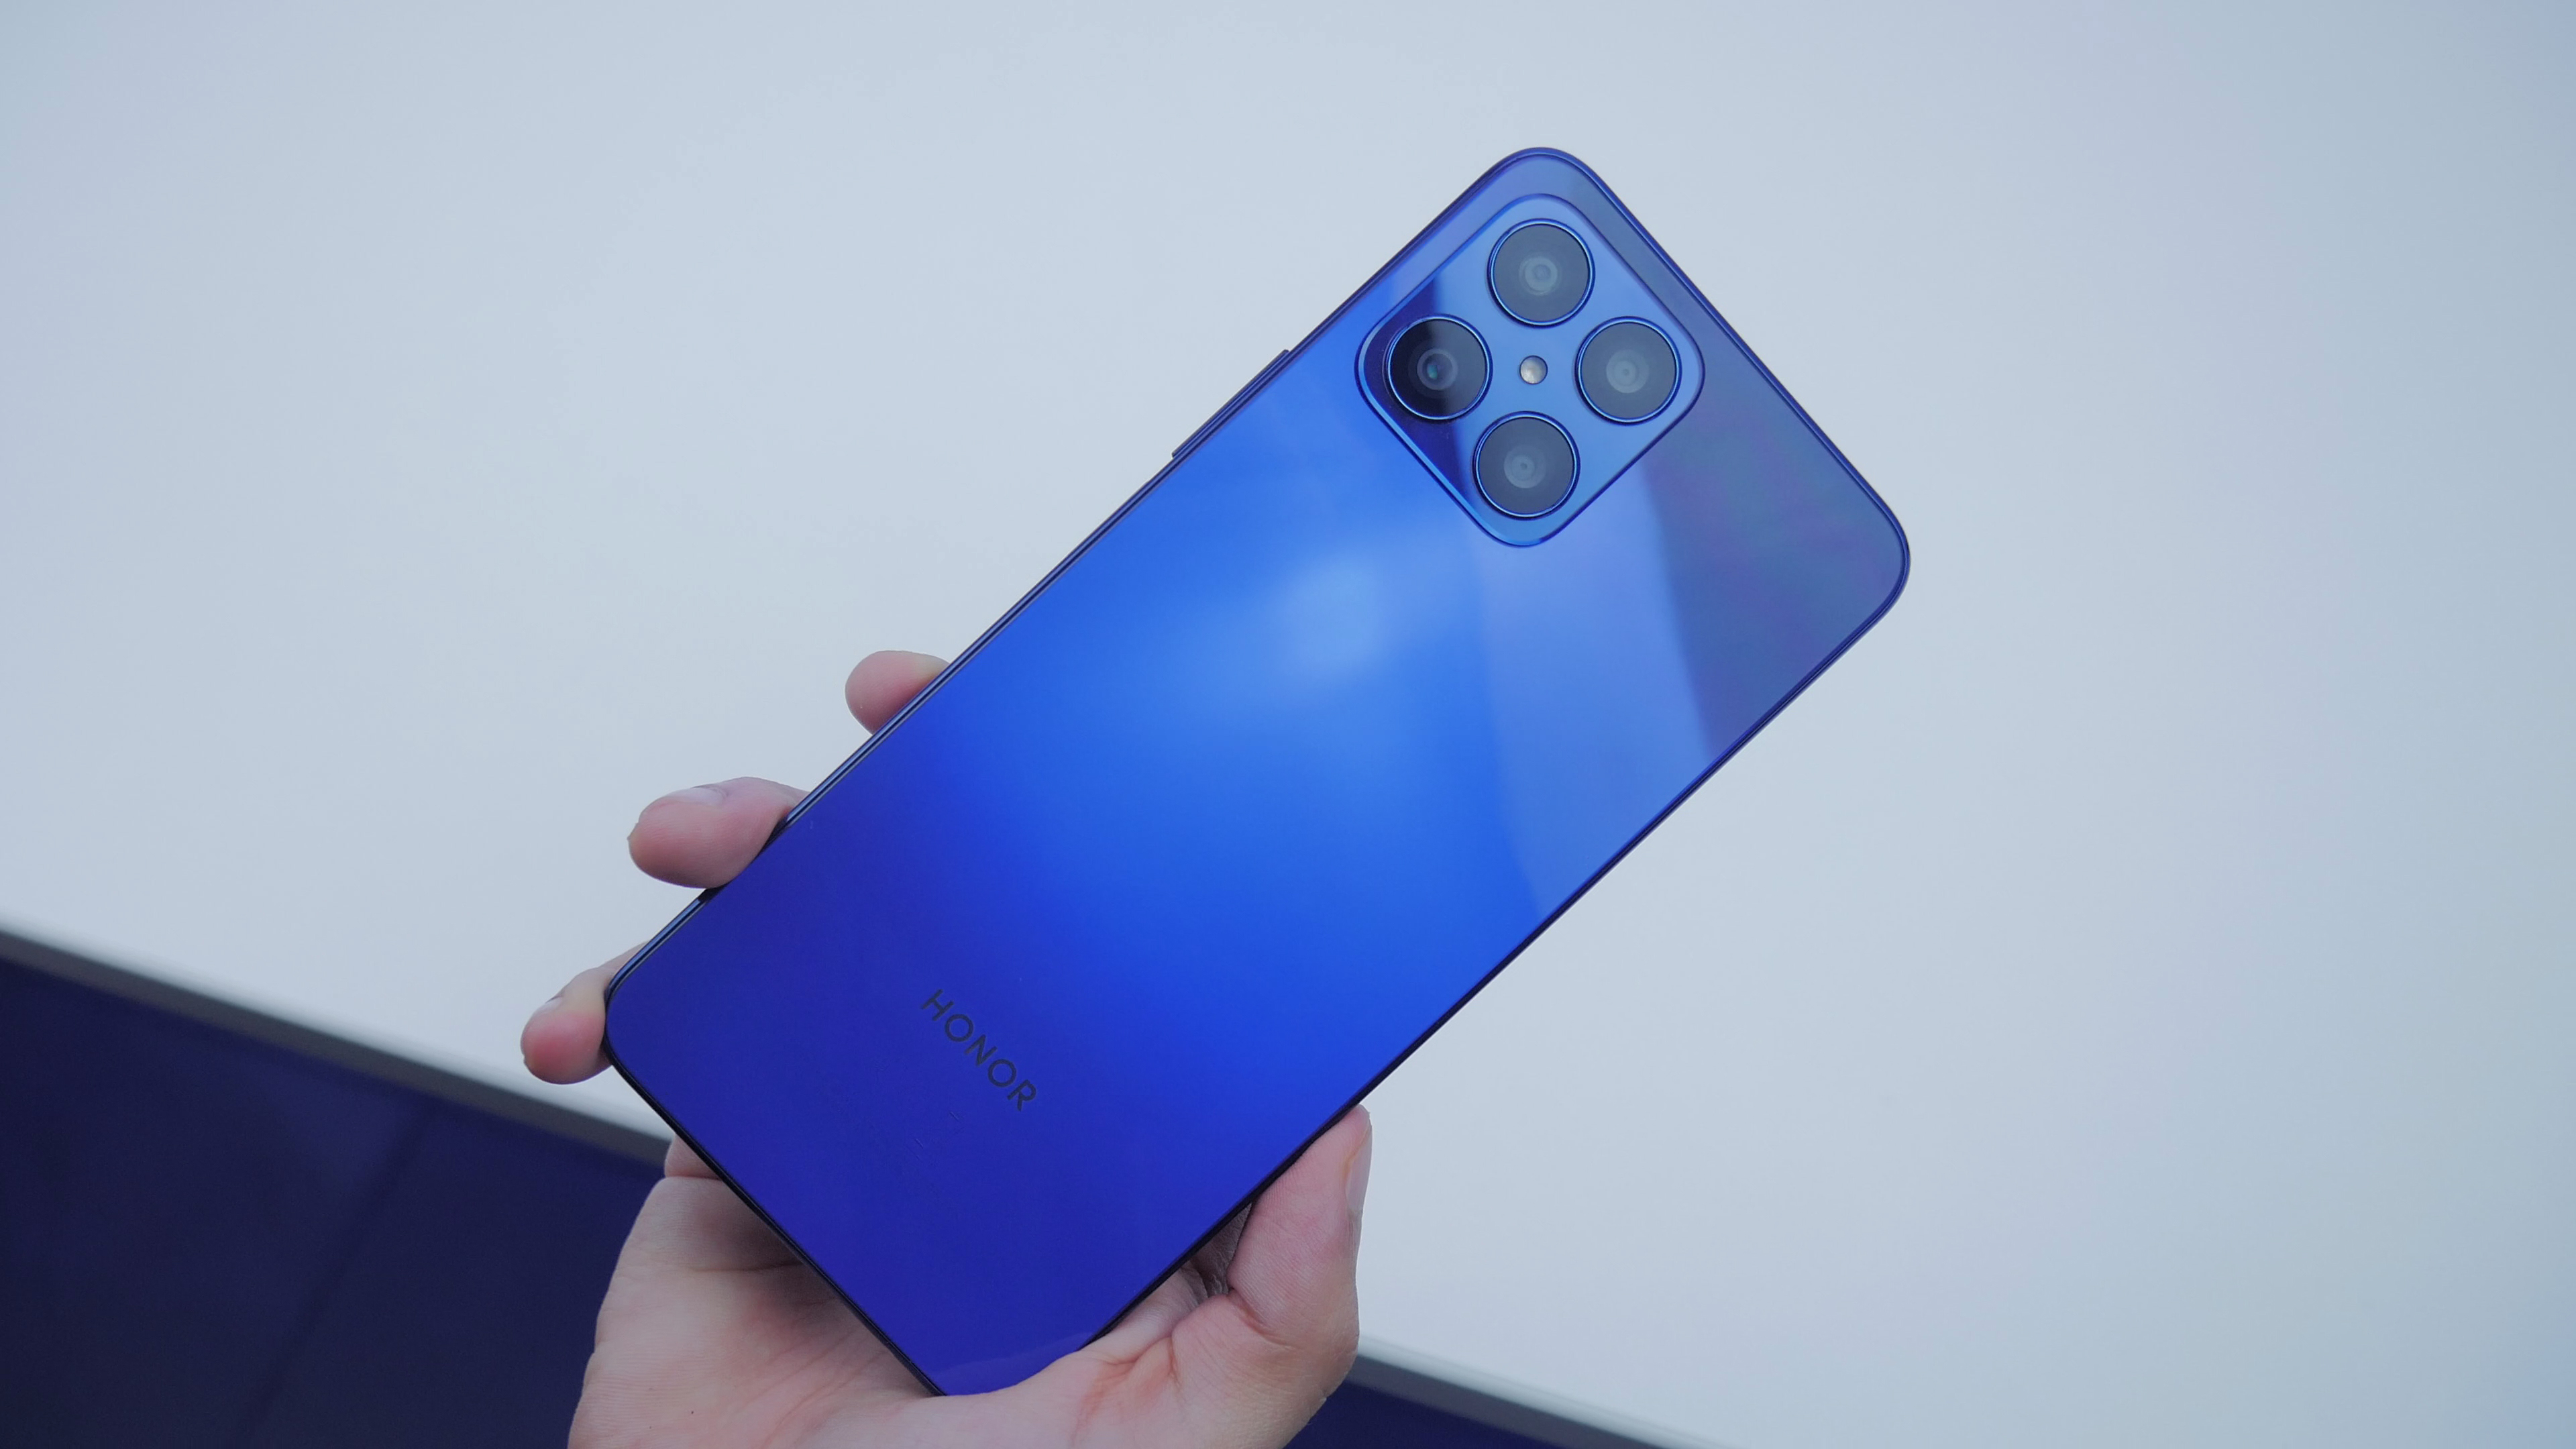 HONOR X8 5G  HONOR Support Global